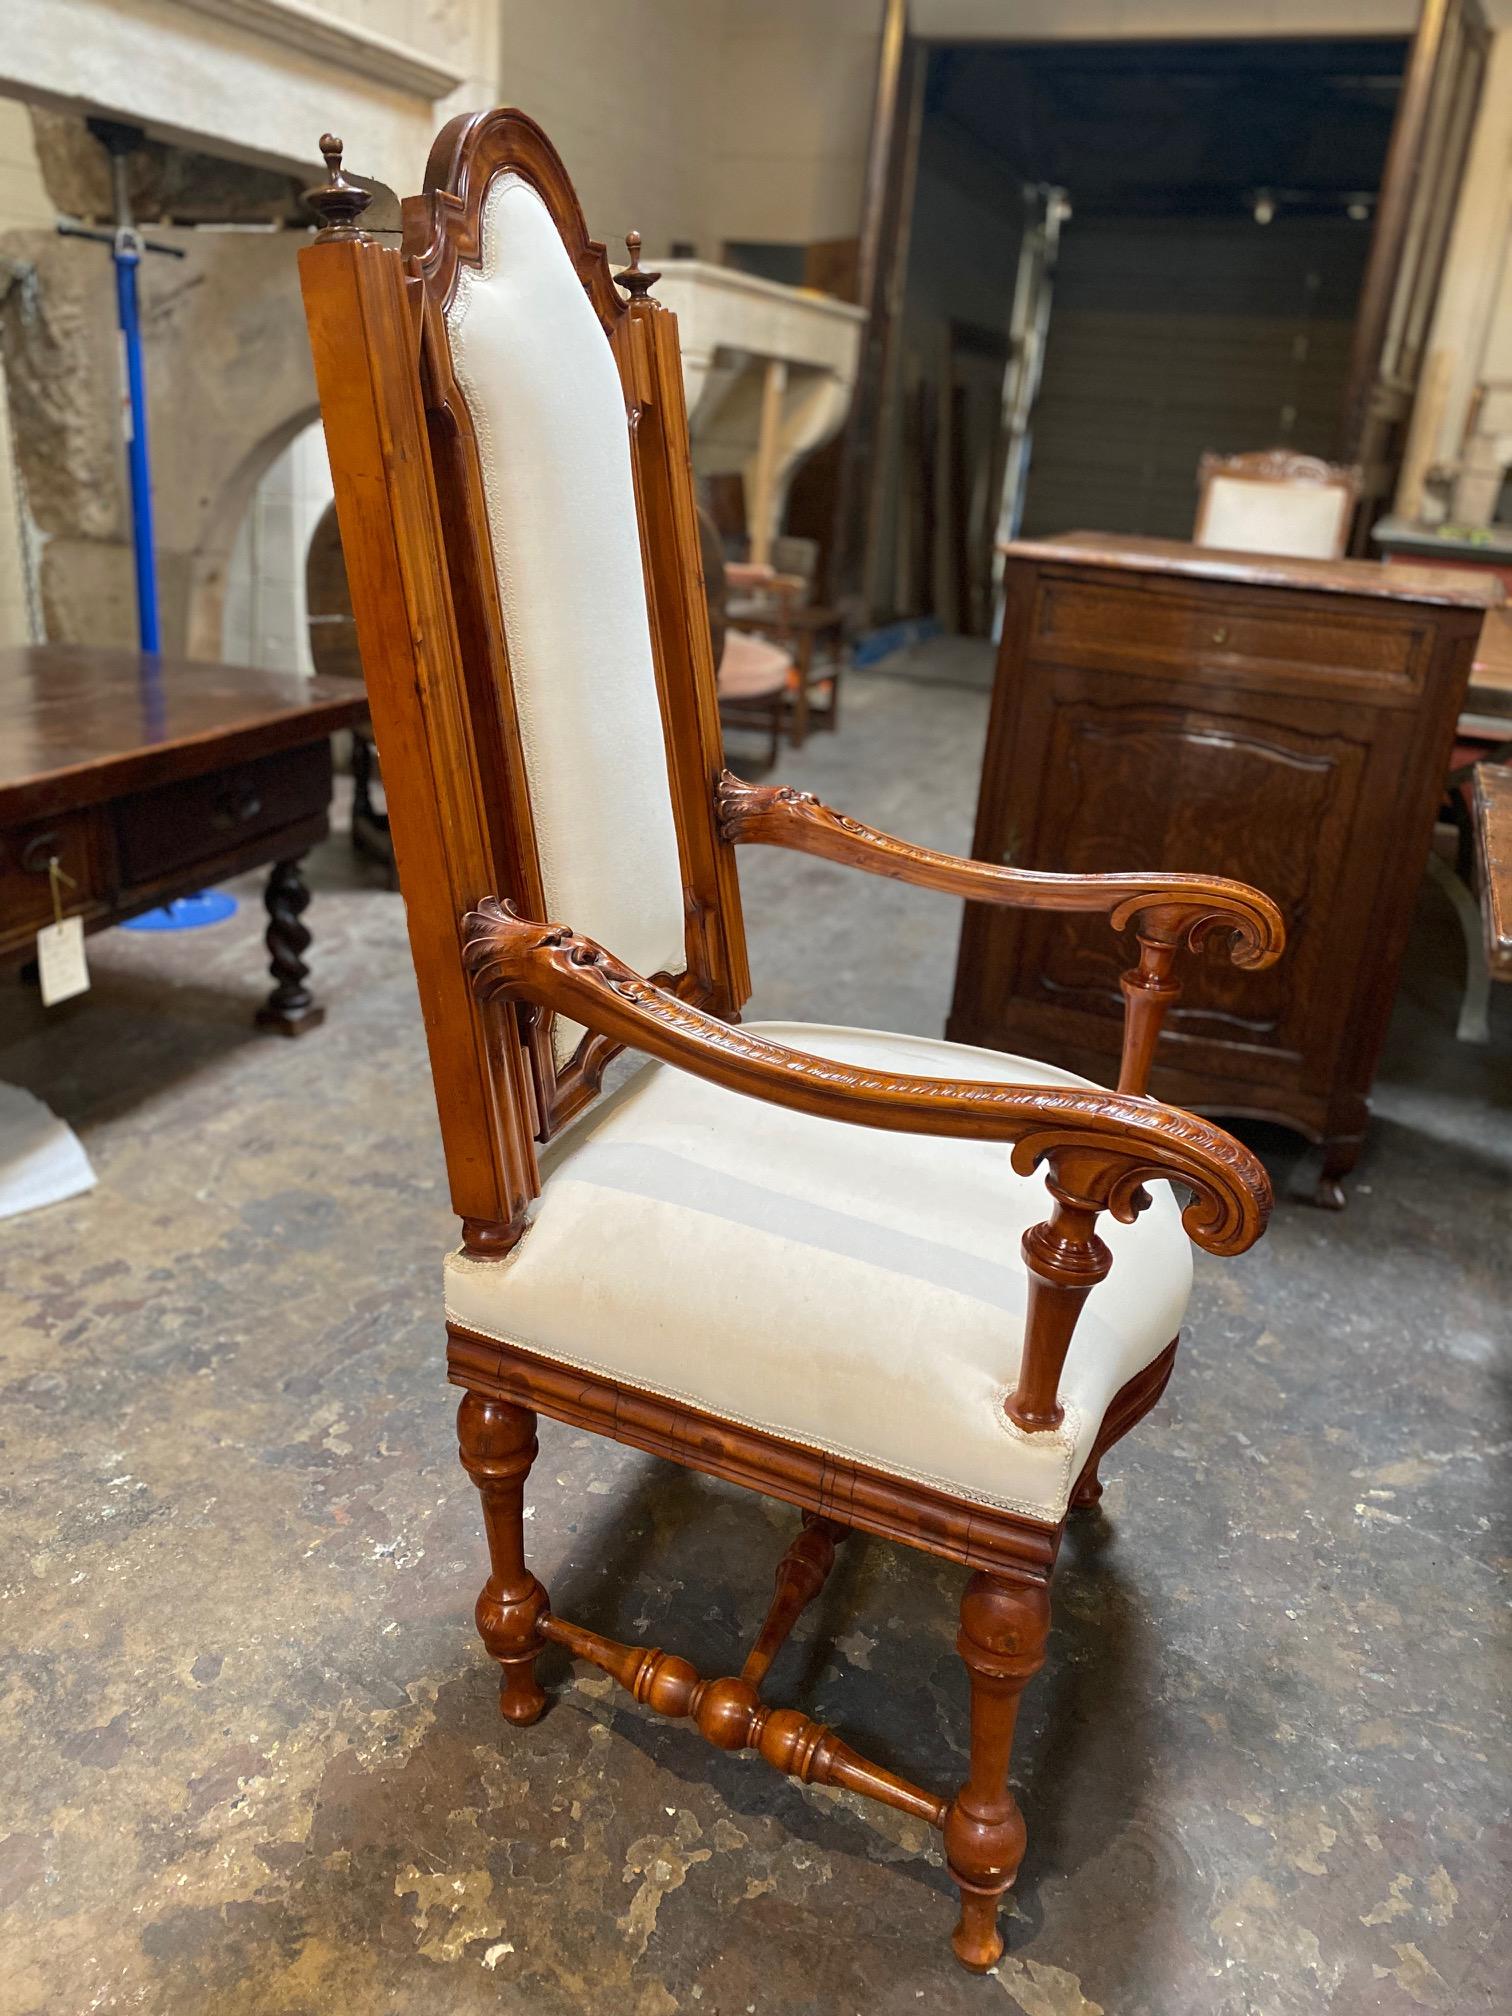 This antique chair originates from Northern France, circa late 1800s.

Measurements: 26